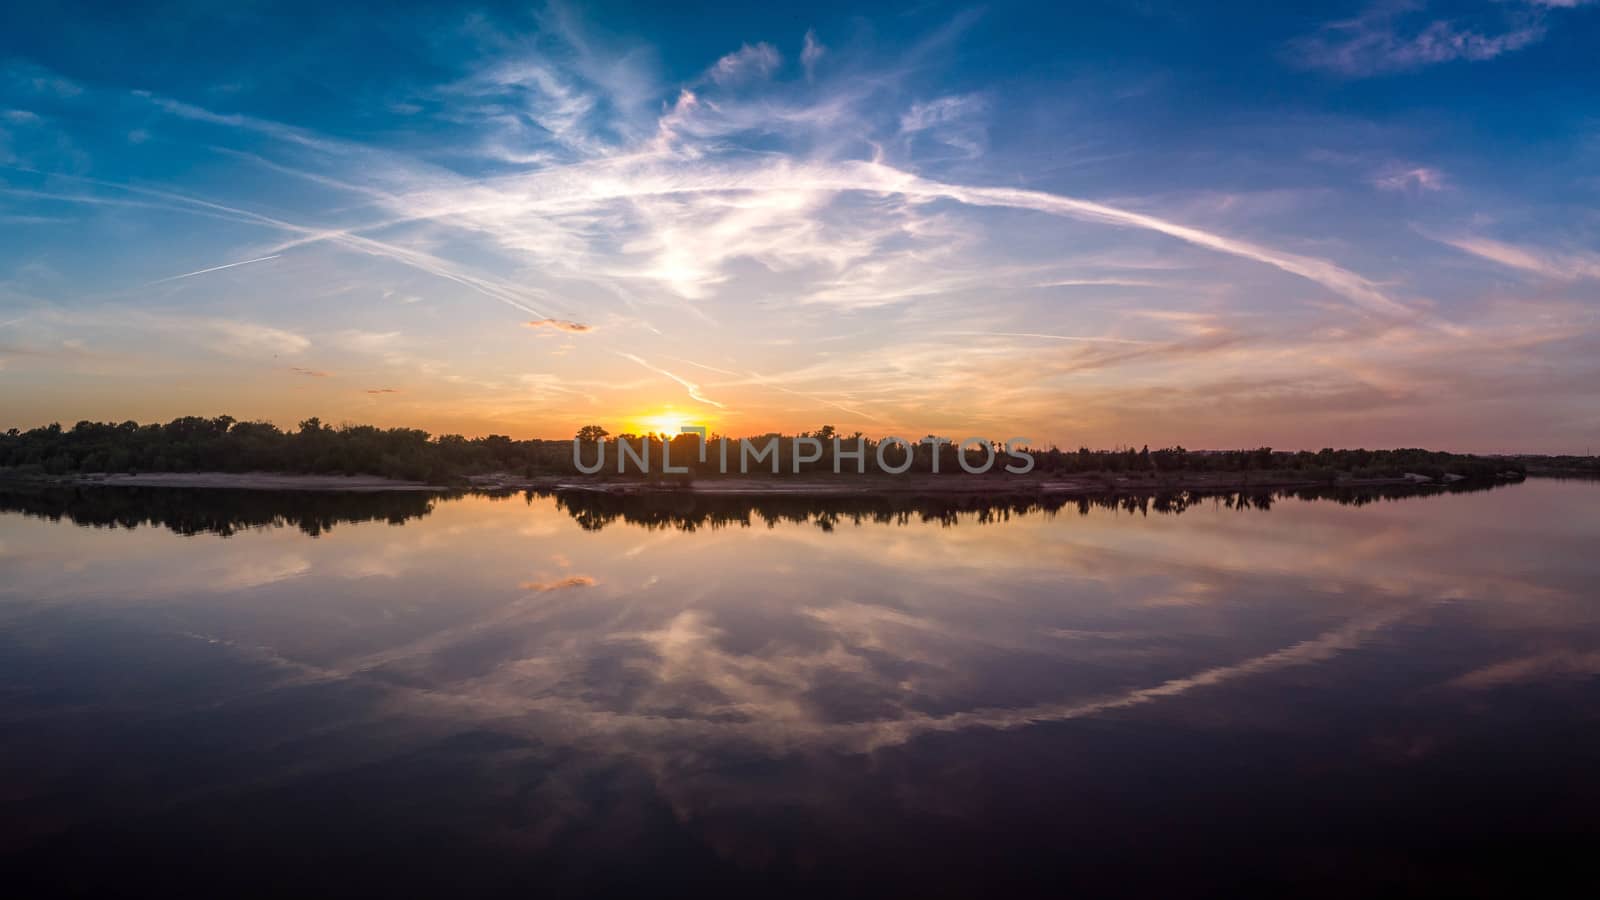 Beautiful landscape with reflection, blue sky and yellow sunlight in sunrise. Amazing scene reminiscent of the eye